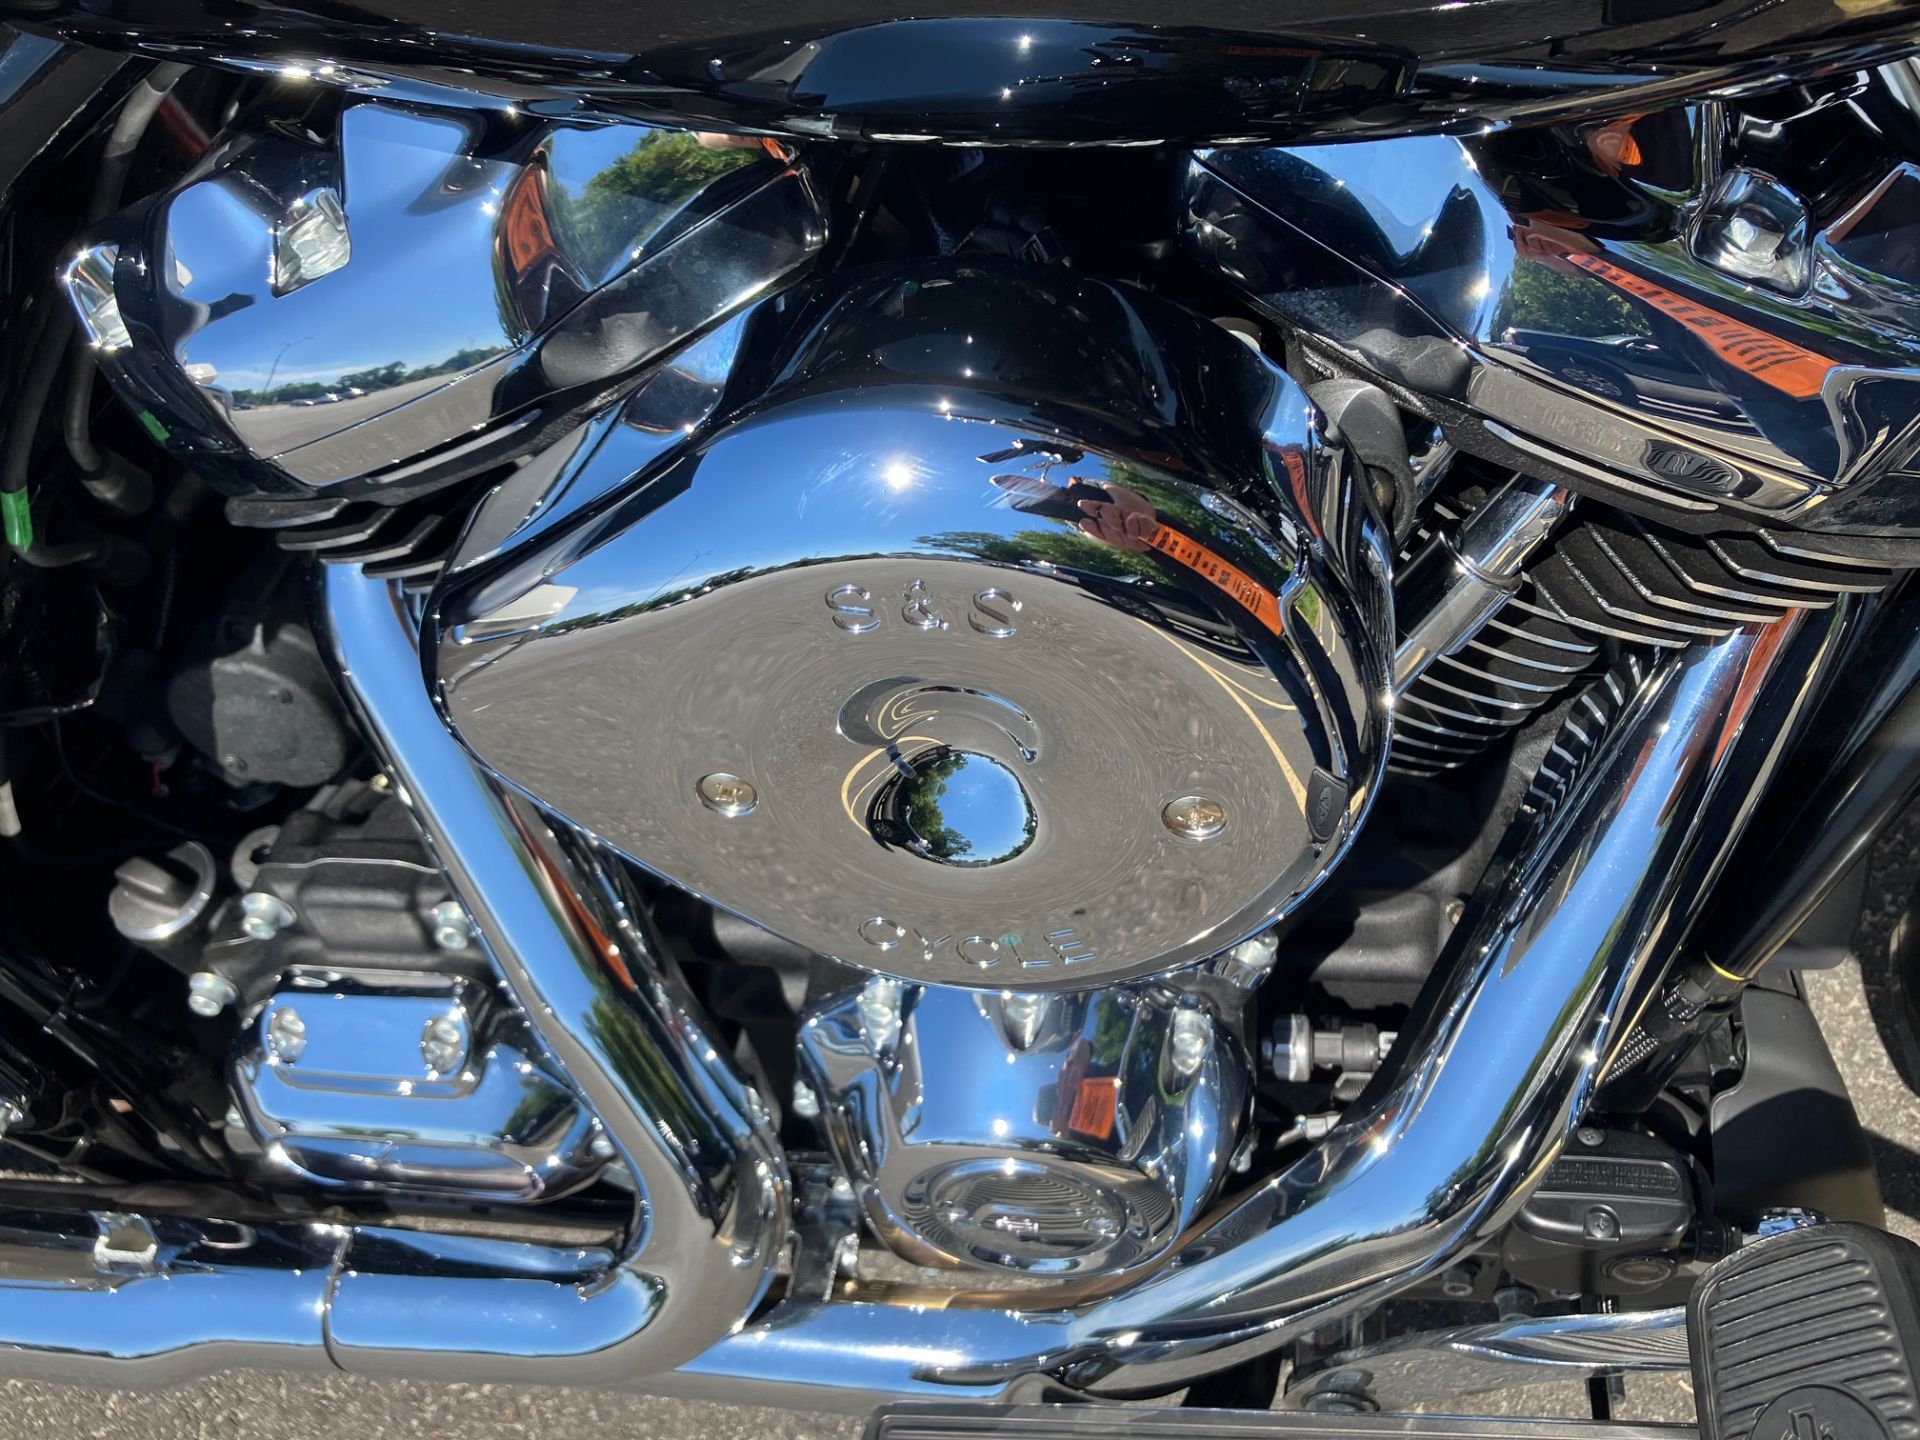 2022 Harley-Davidson ROAD KING in West Long Branch, New Jersey - Photo 10